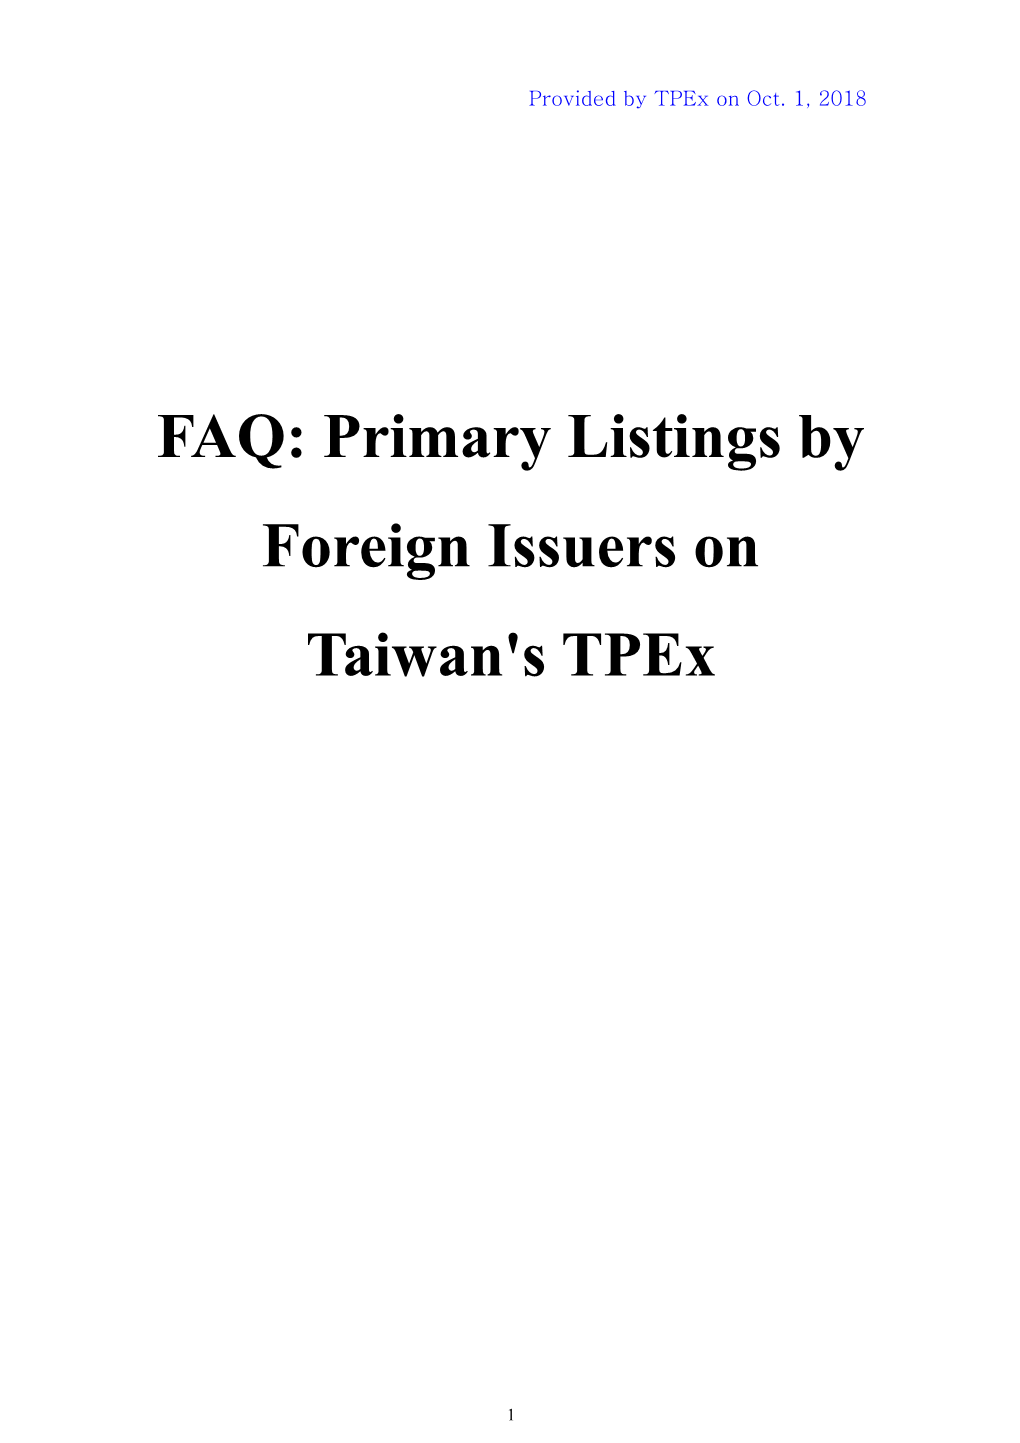 FAQ: Primary Listings by Foreign Issuers on Taiwan's Tpex